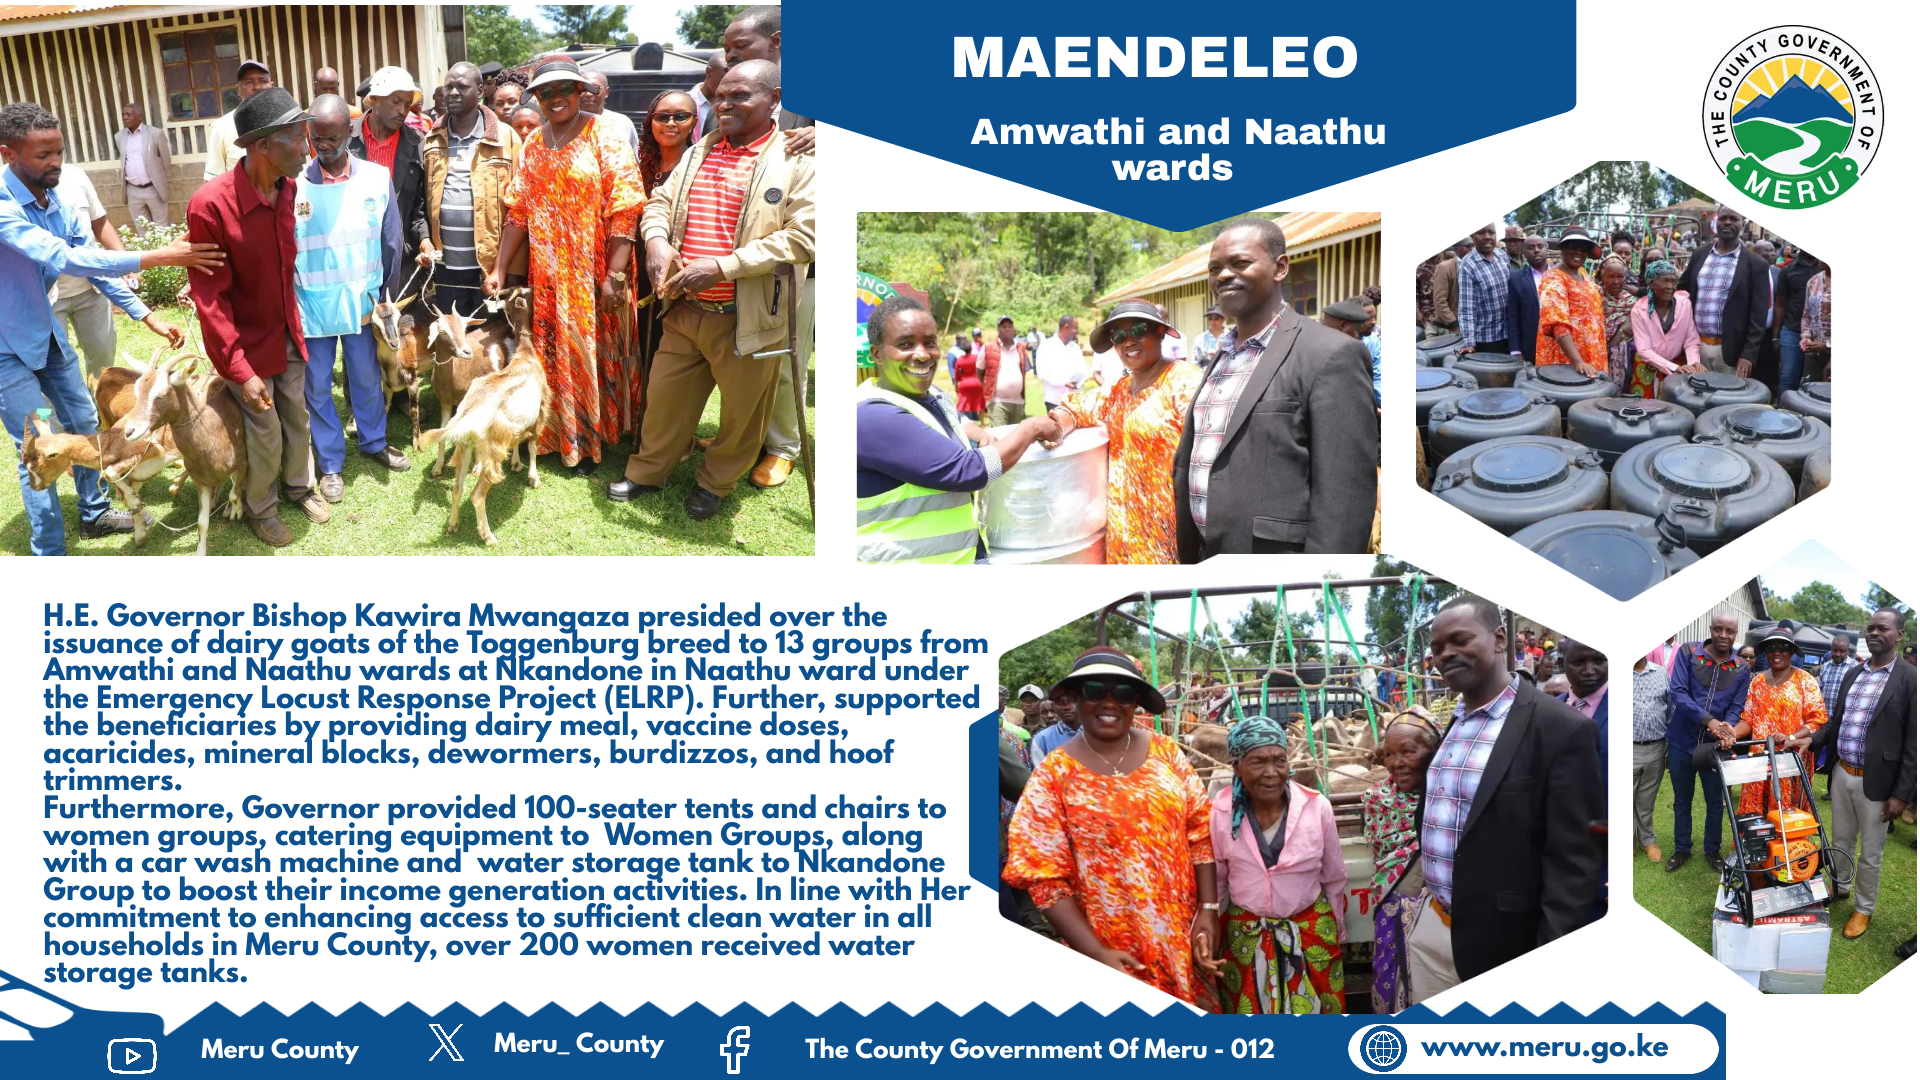 Governor Mwangaza Empowers Communities: Dairy Goats and Essential Support Distributed.